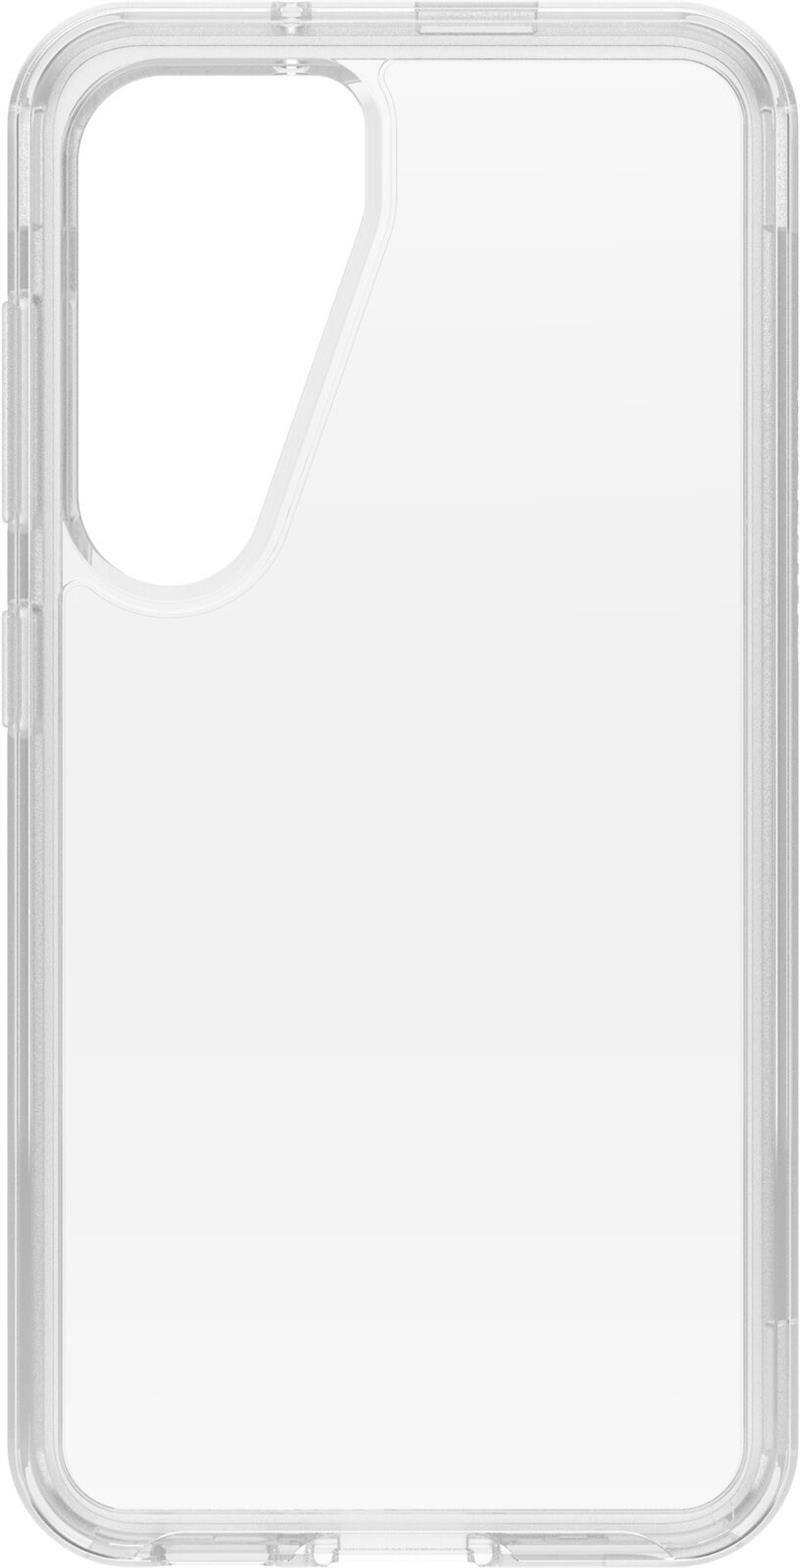 OTTERBOX Symmetry Clear HOMEGROWN Clear